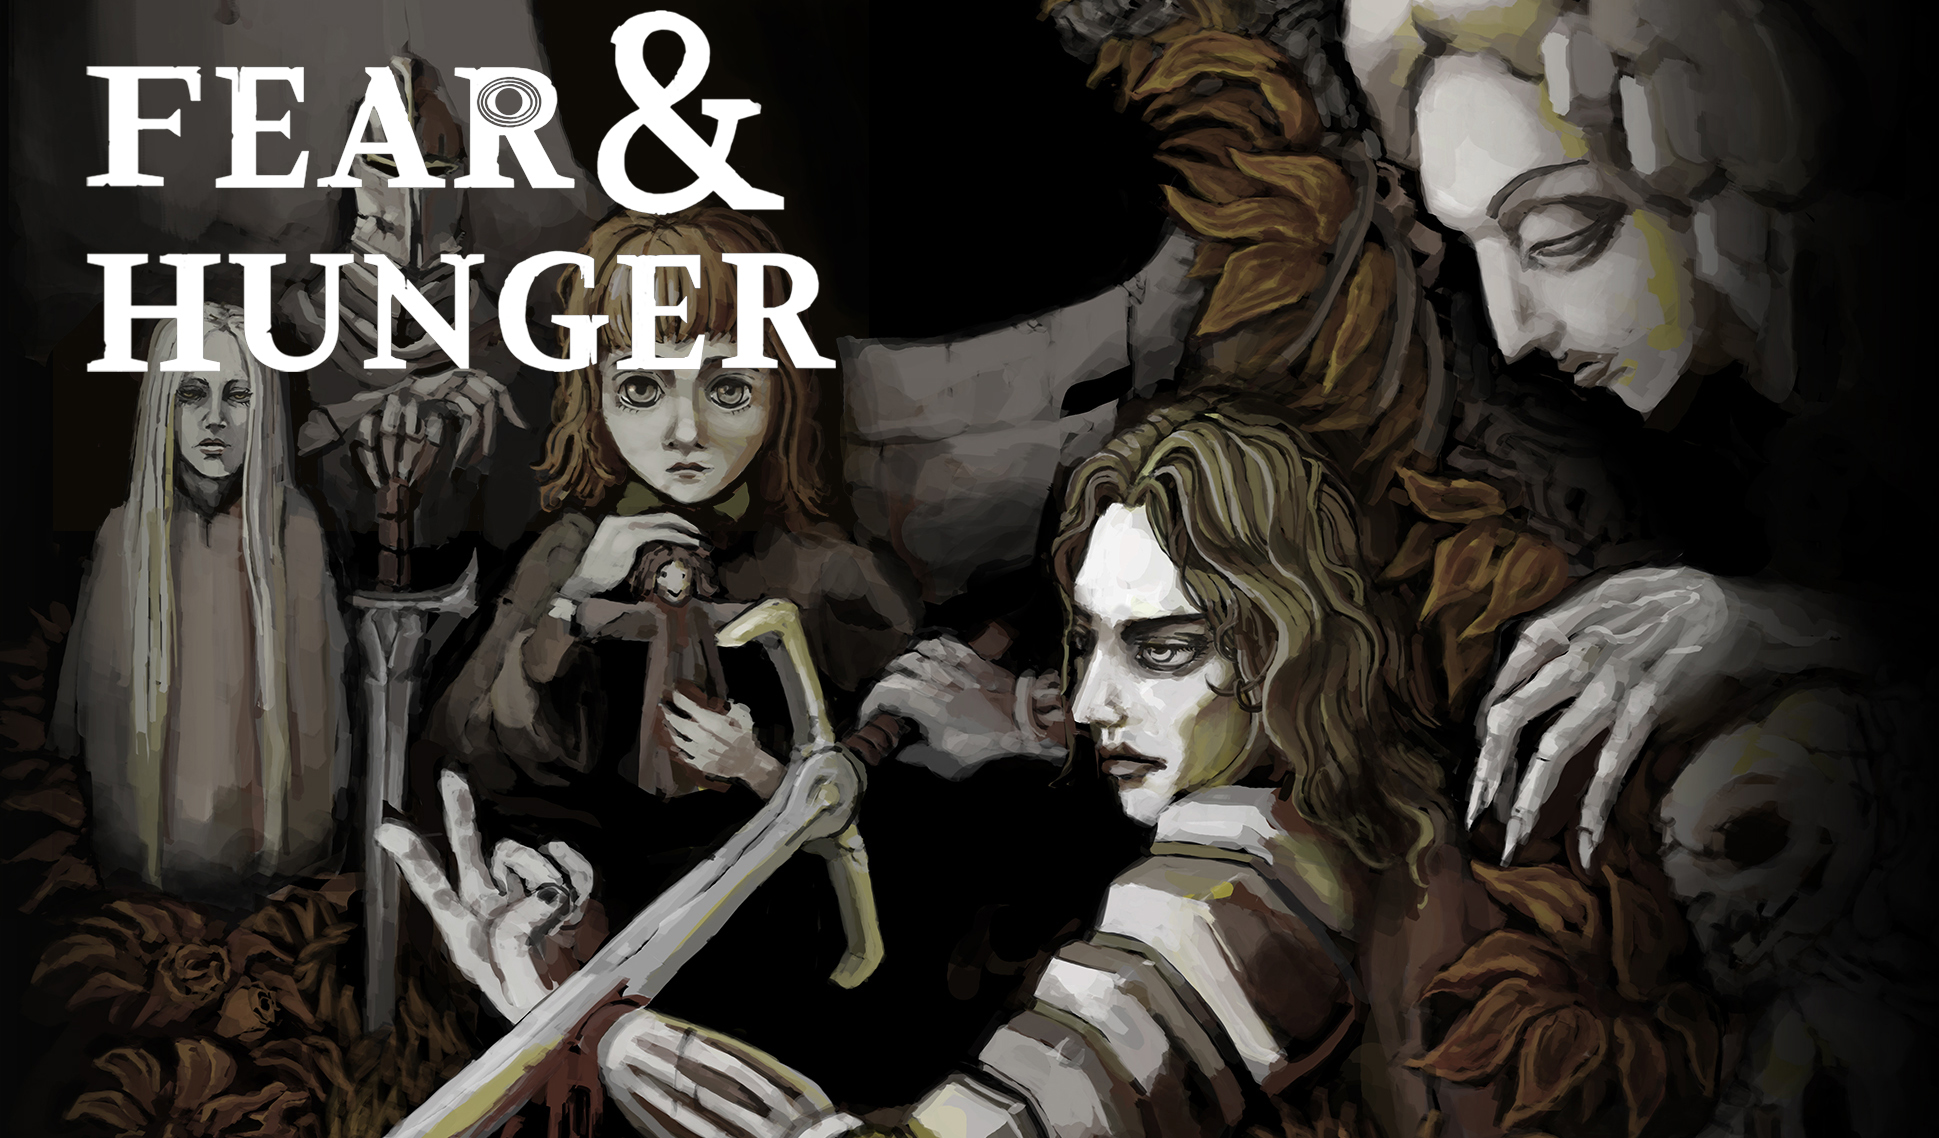 Opening screen of the video game Fear and Hunger